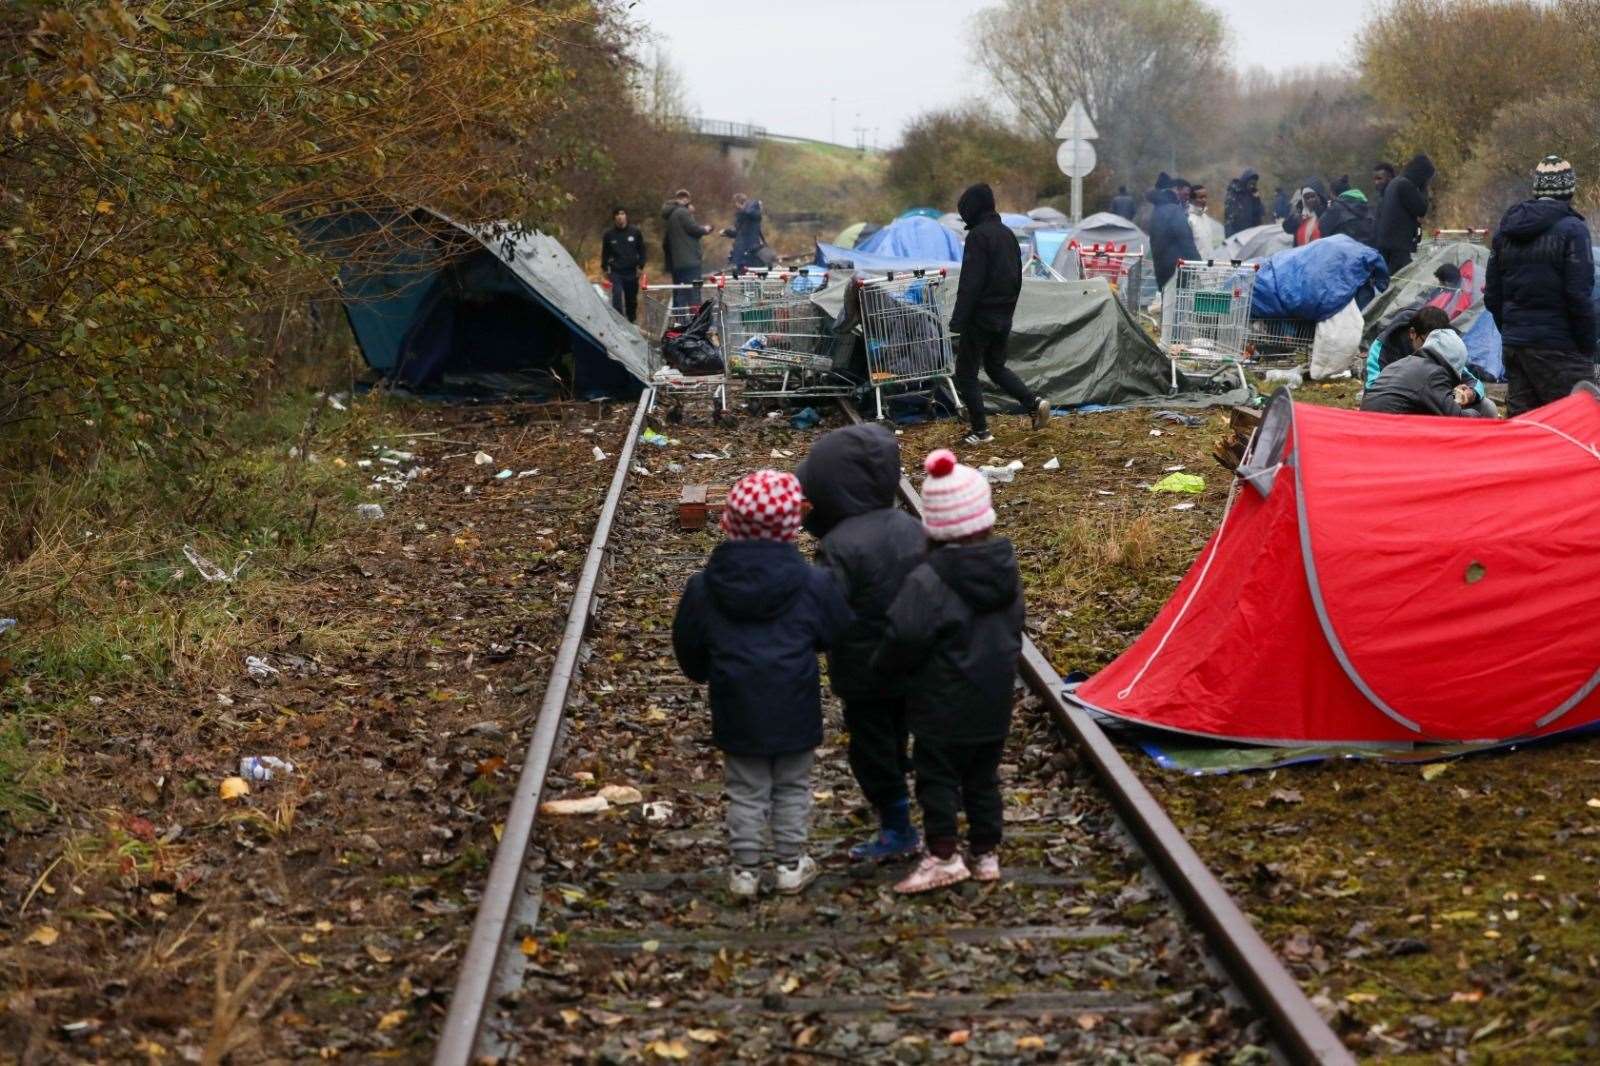 Asylum seekers in a camp in France Image bank: UKNIP